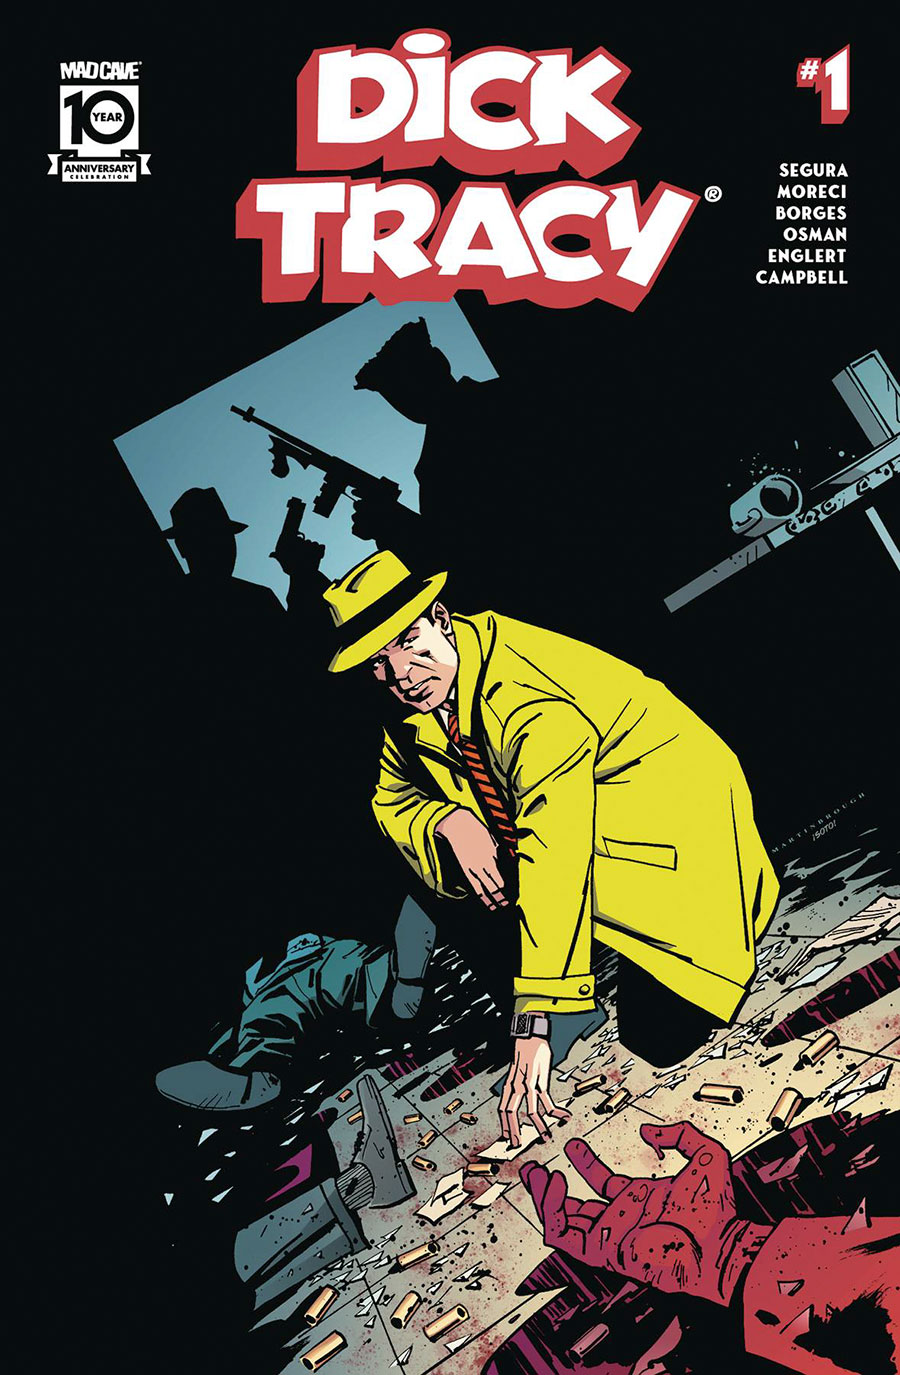 Dick Tracy (Mad Cave Studios) #1 Cover C Variant Shawn Martinbrough & Chris Sotomayor Cover